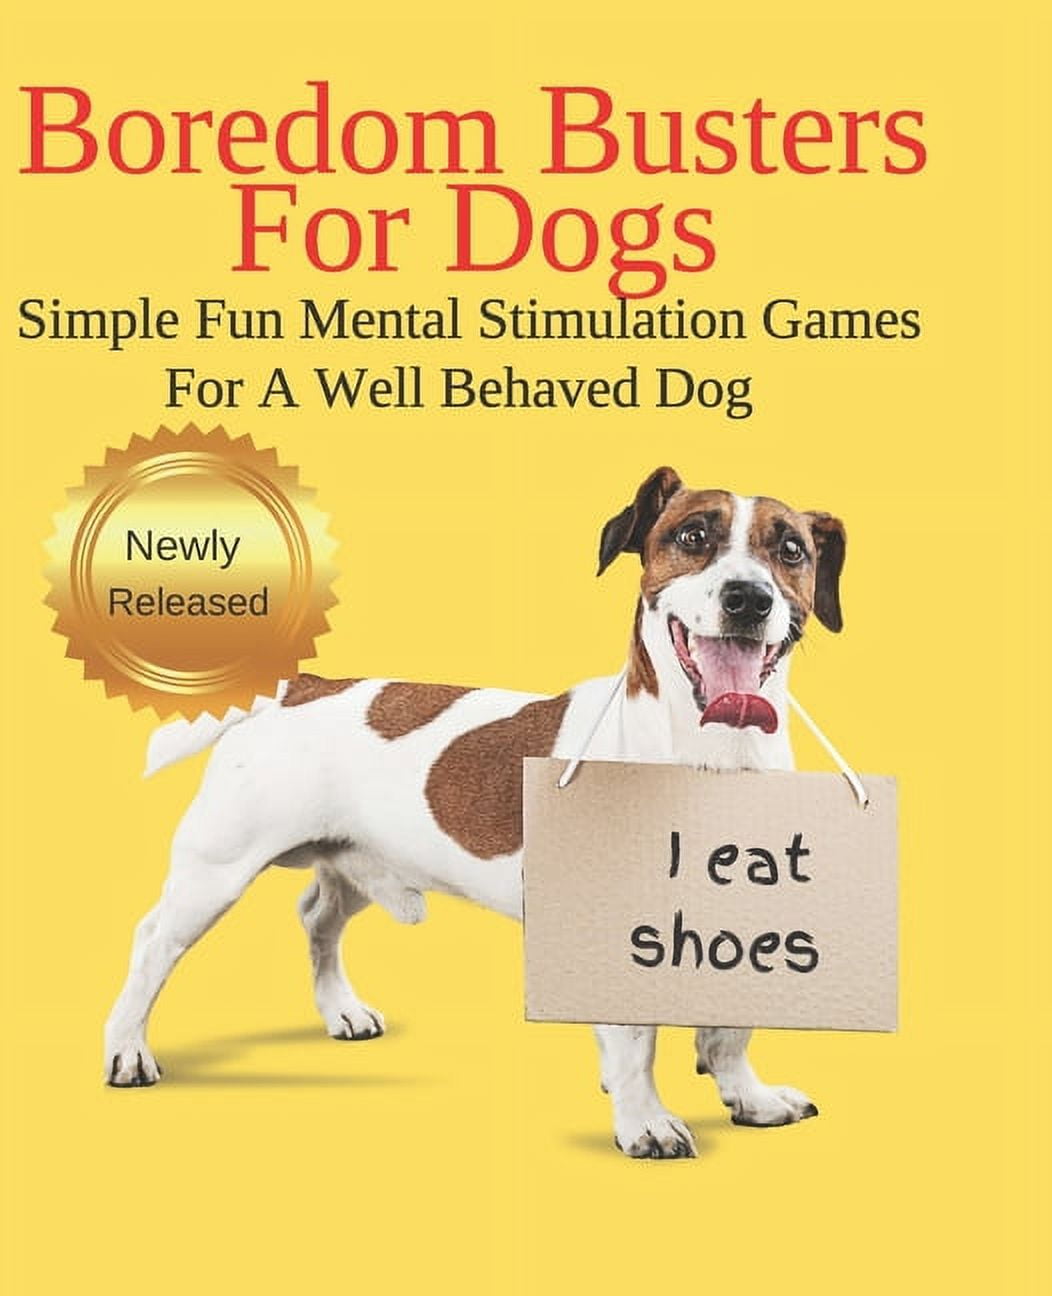 Dog Boredom Busters